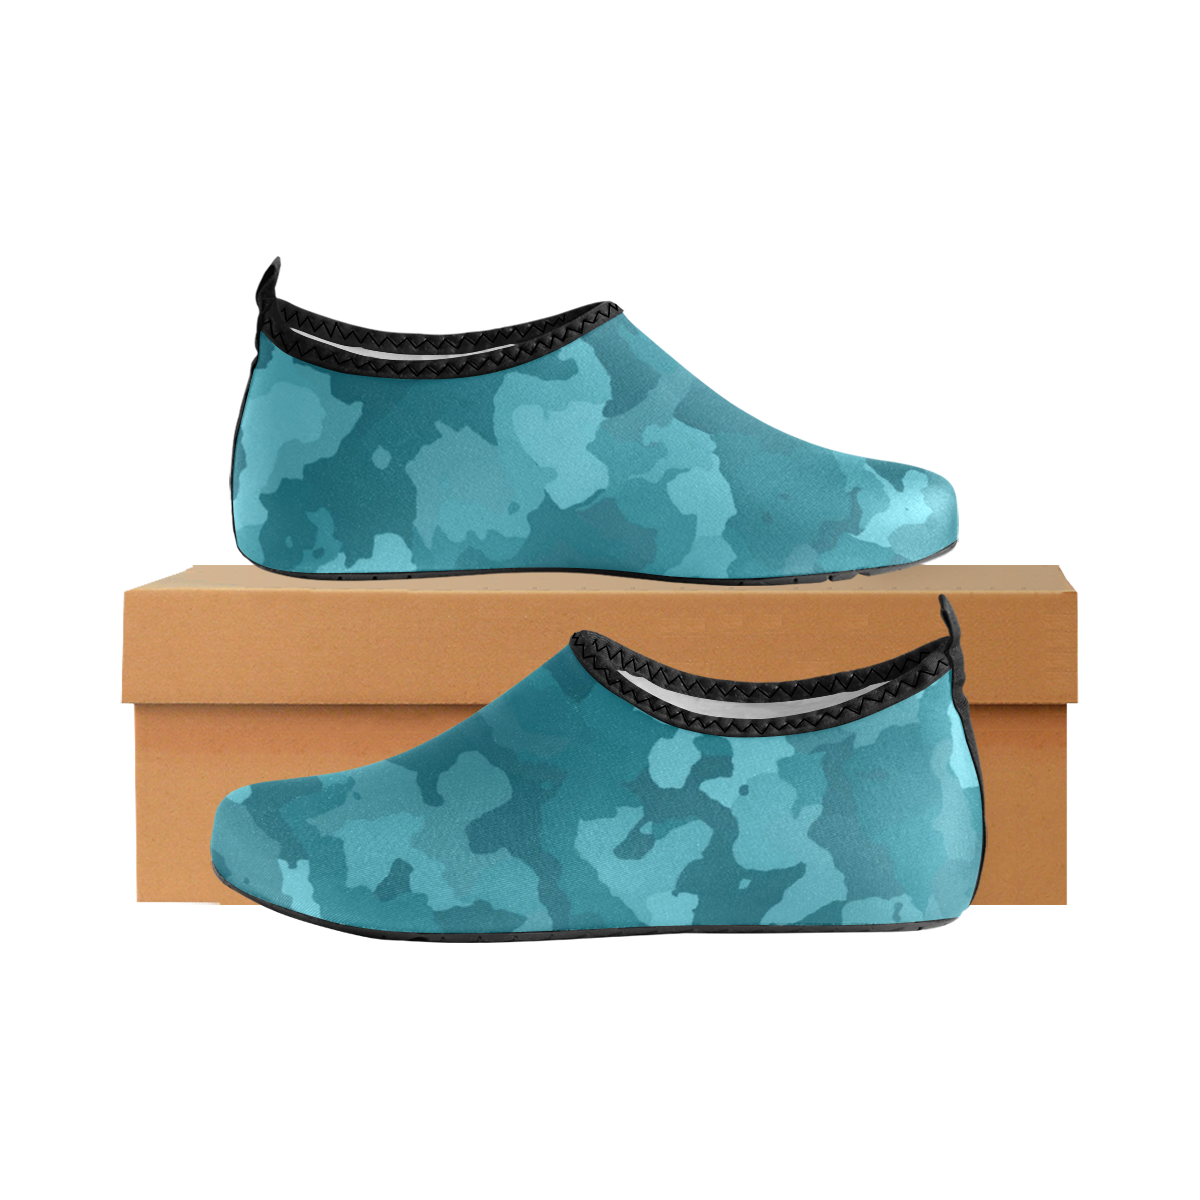 camouflage teal Women's Slip-On Water Shoes (Model 056)